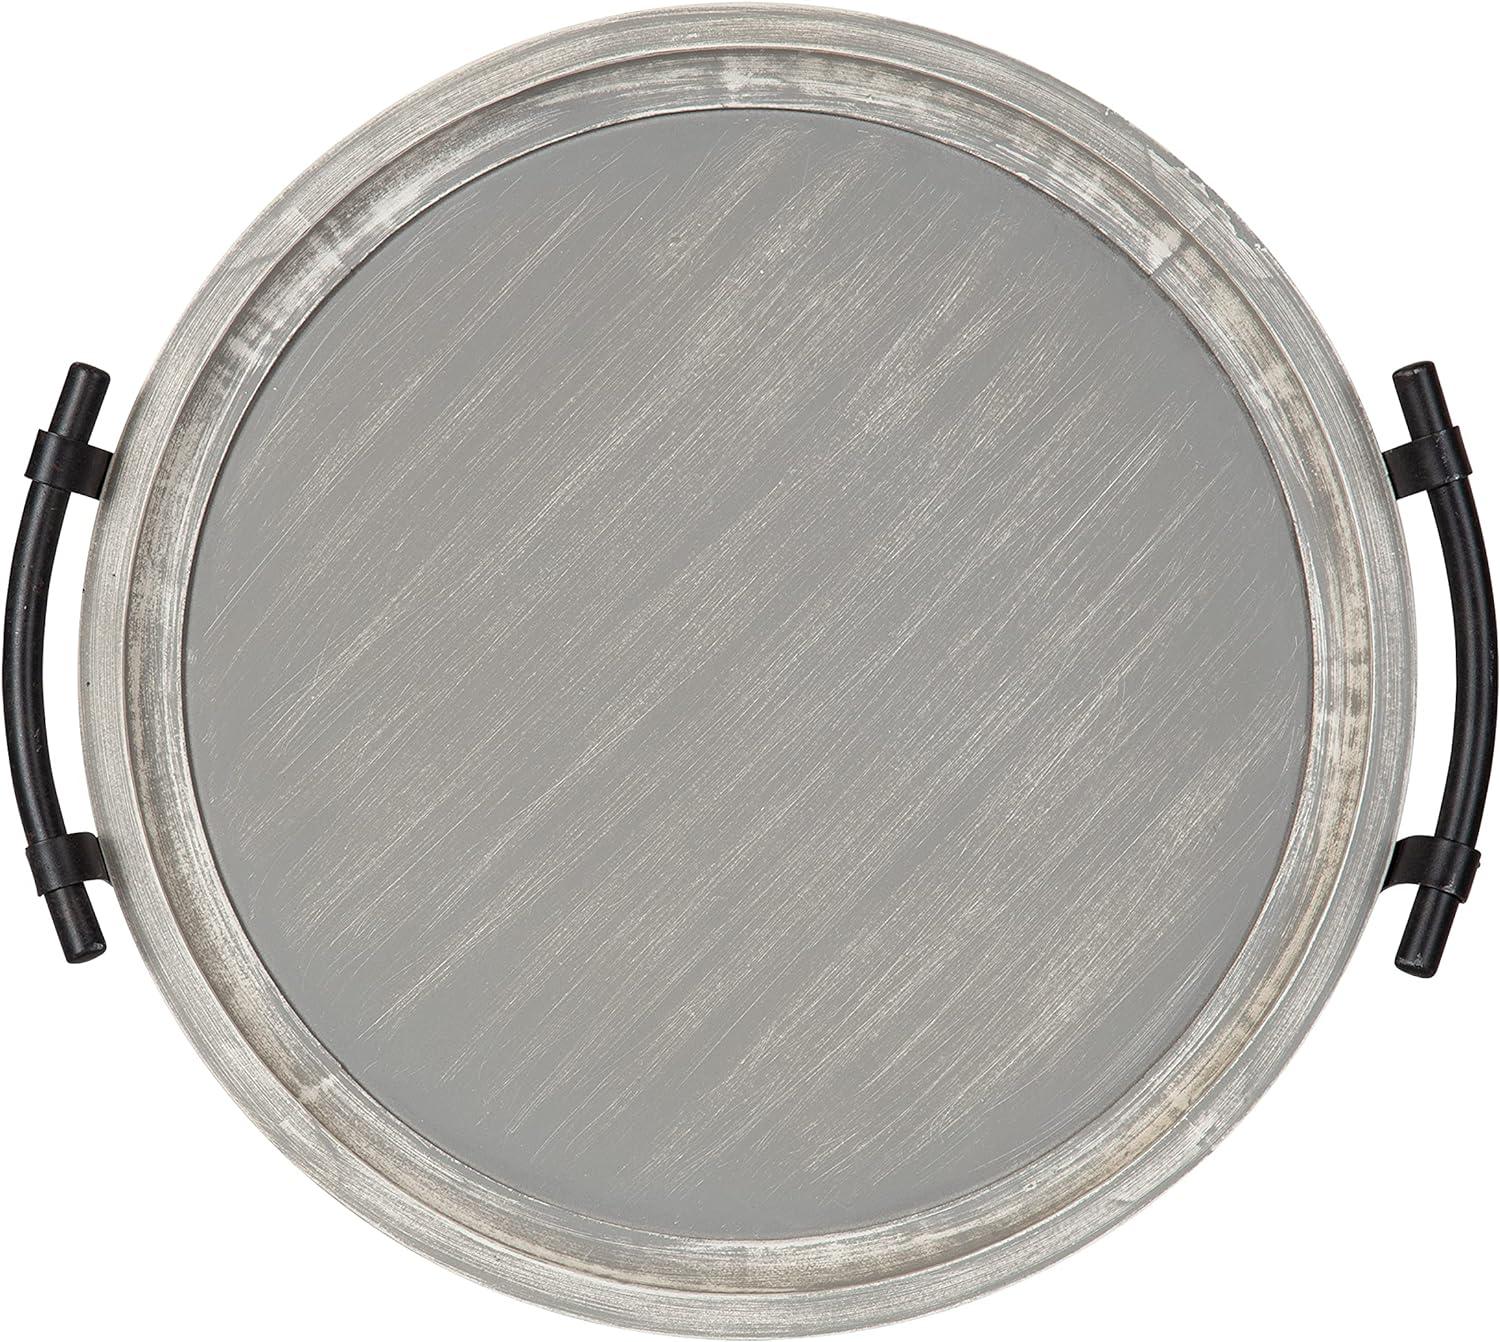 Rustic Gray Distressed Wooden Round Tray with Metal Handles